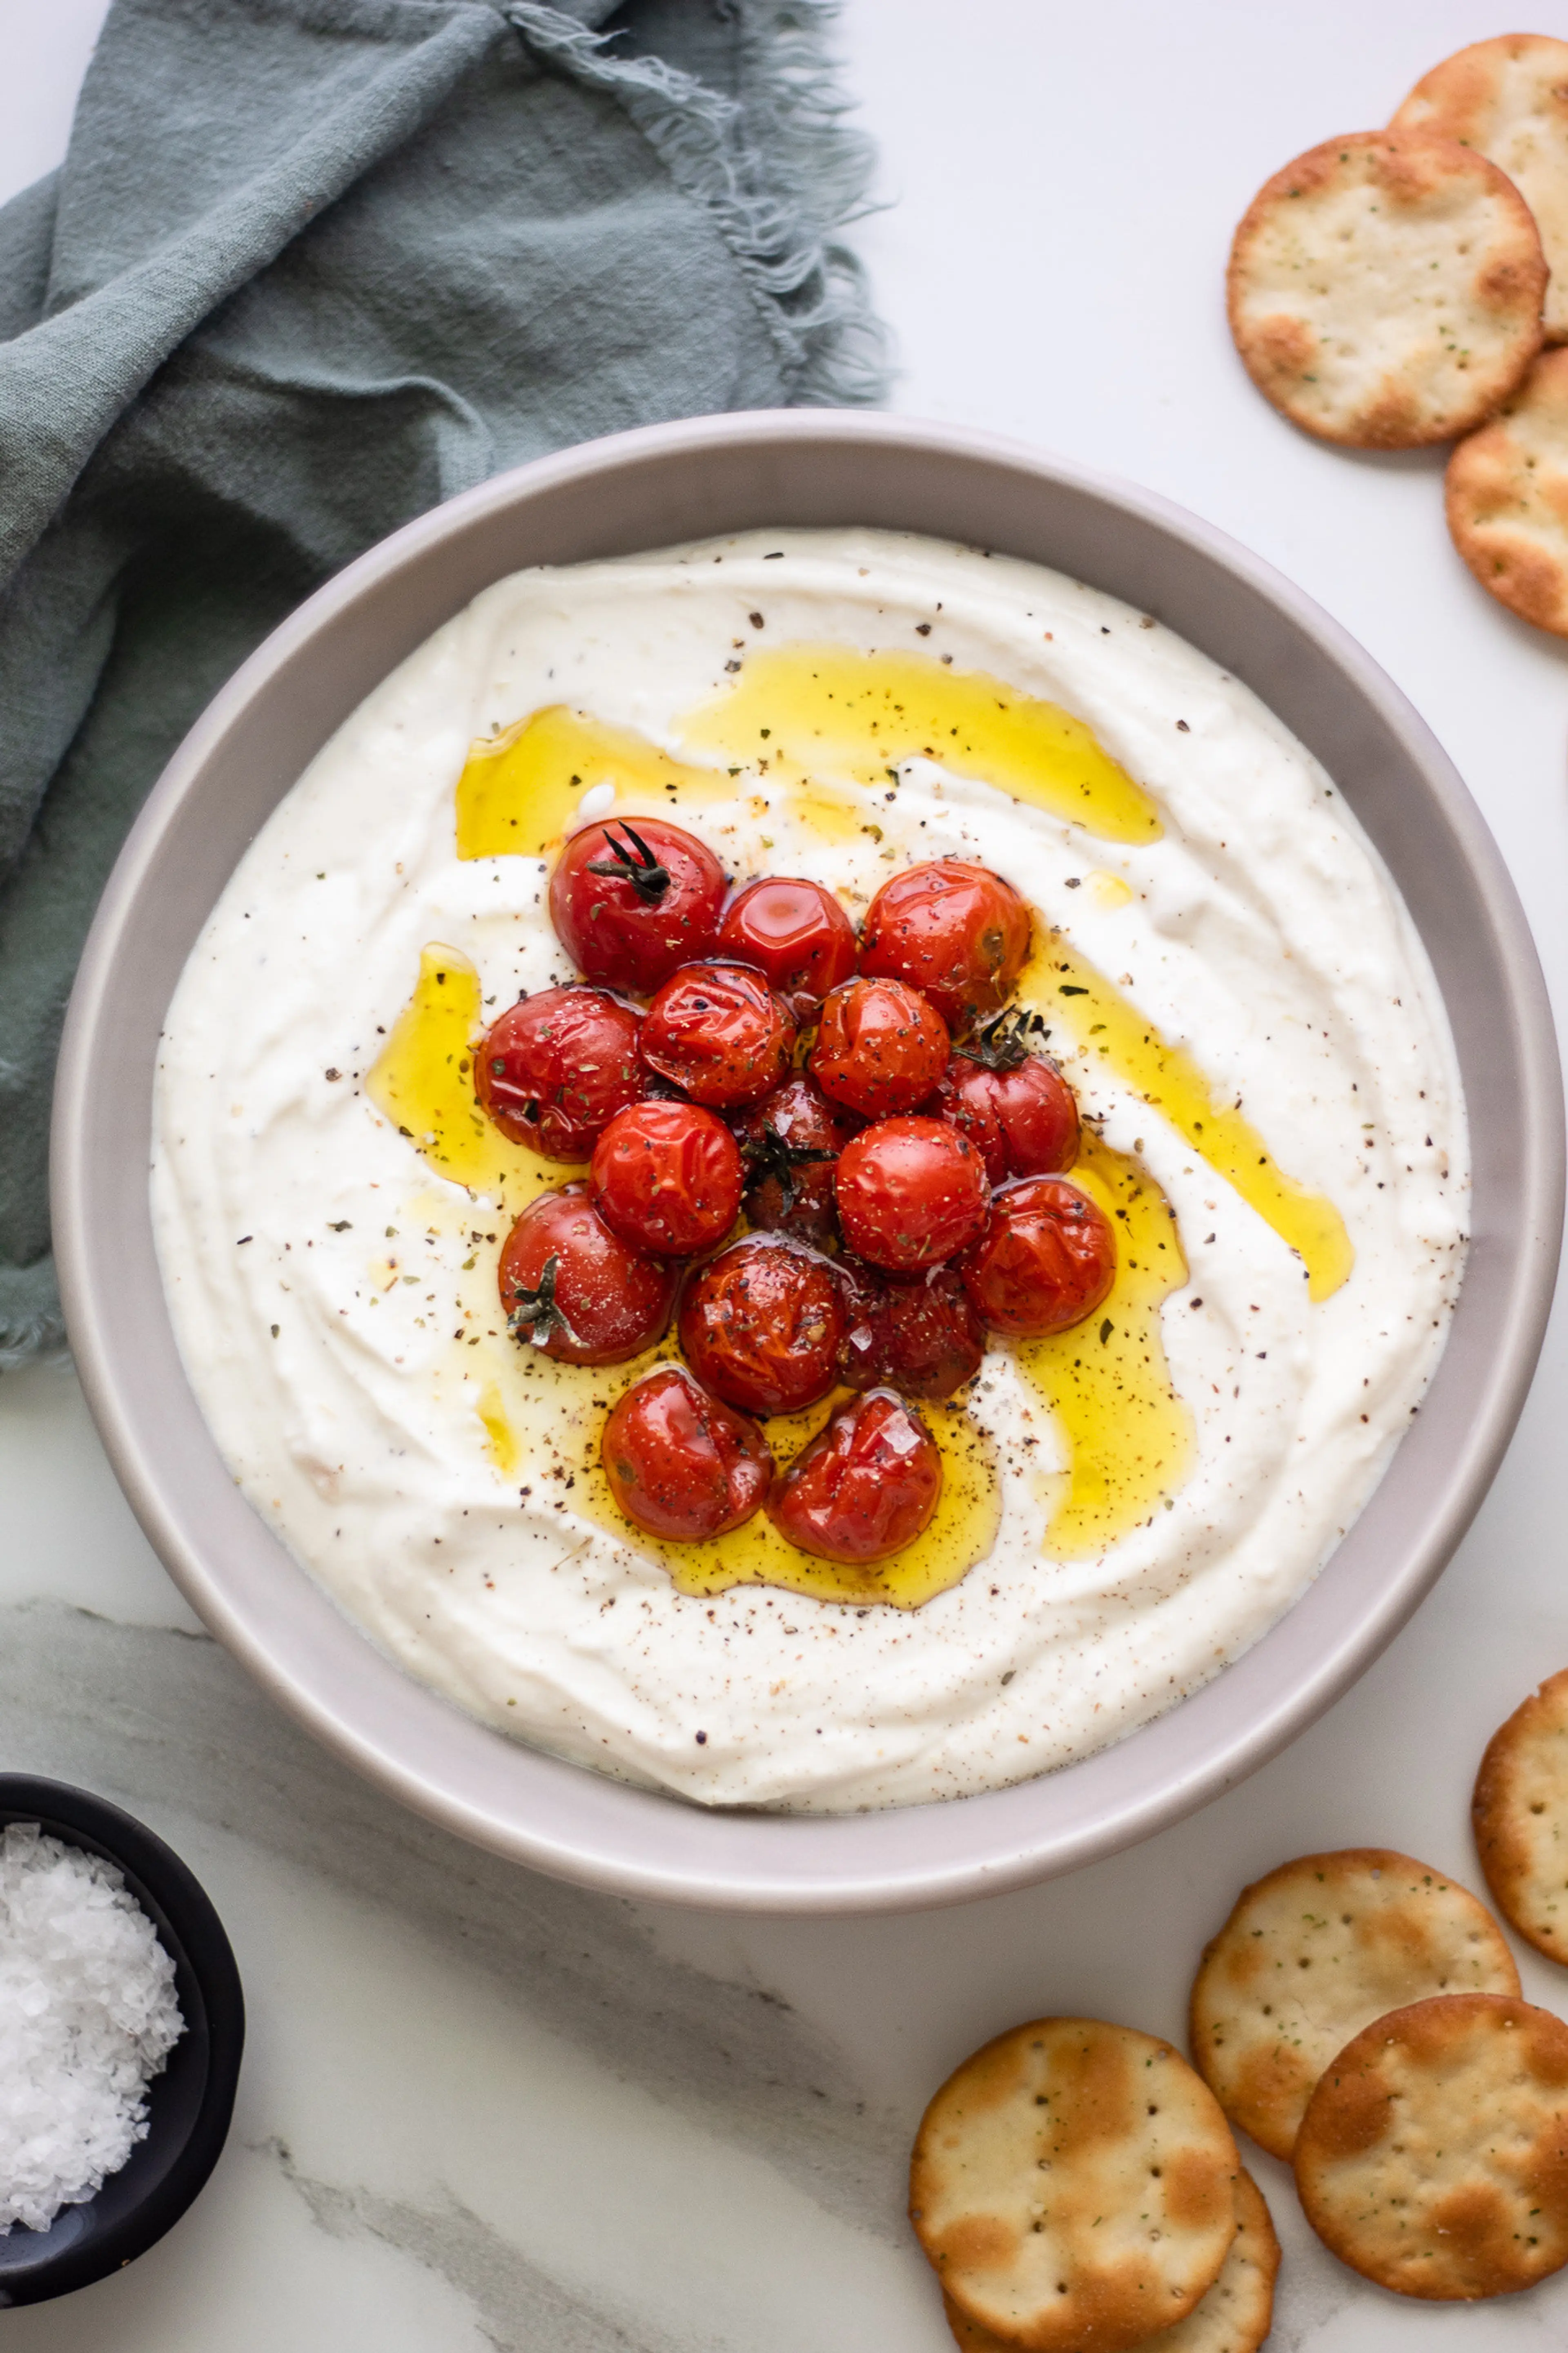 Roasted Garlic Whipped Ricotta (with Smoked Salmon)